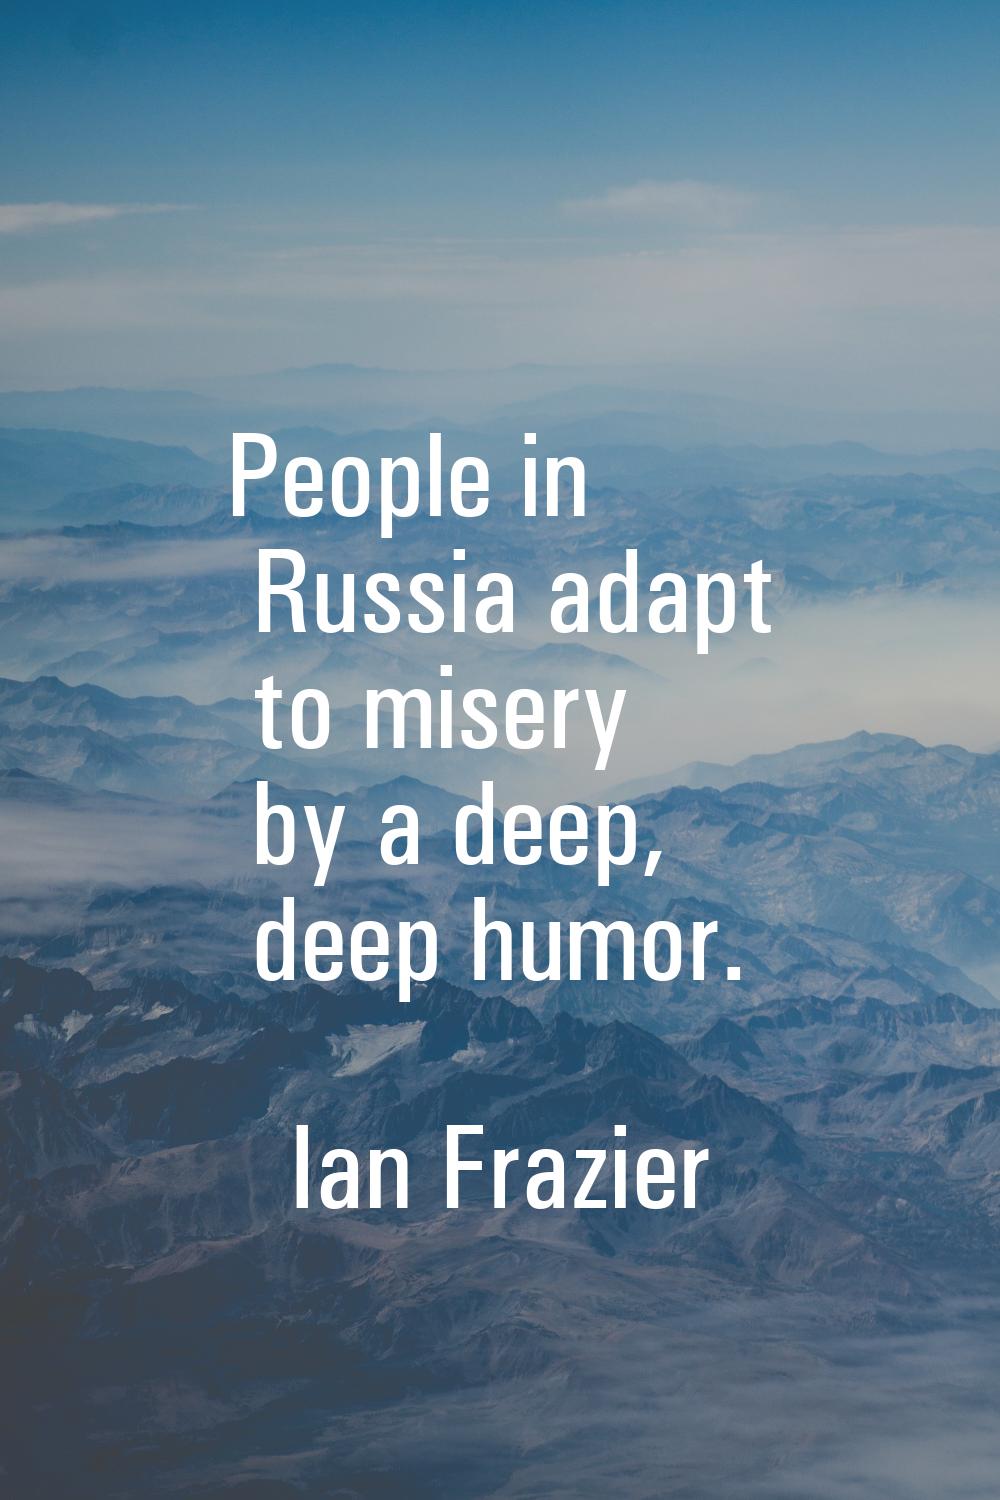 People in Russia adapt to misery by a deep, deep humor.